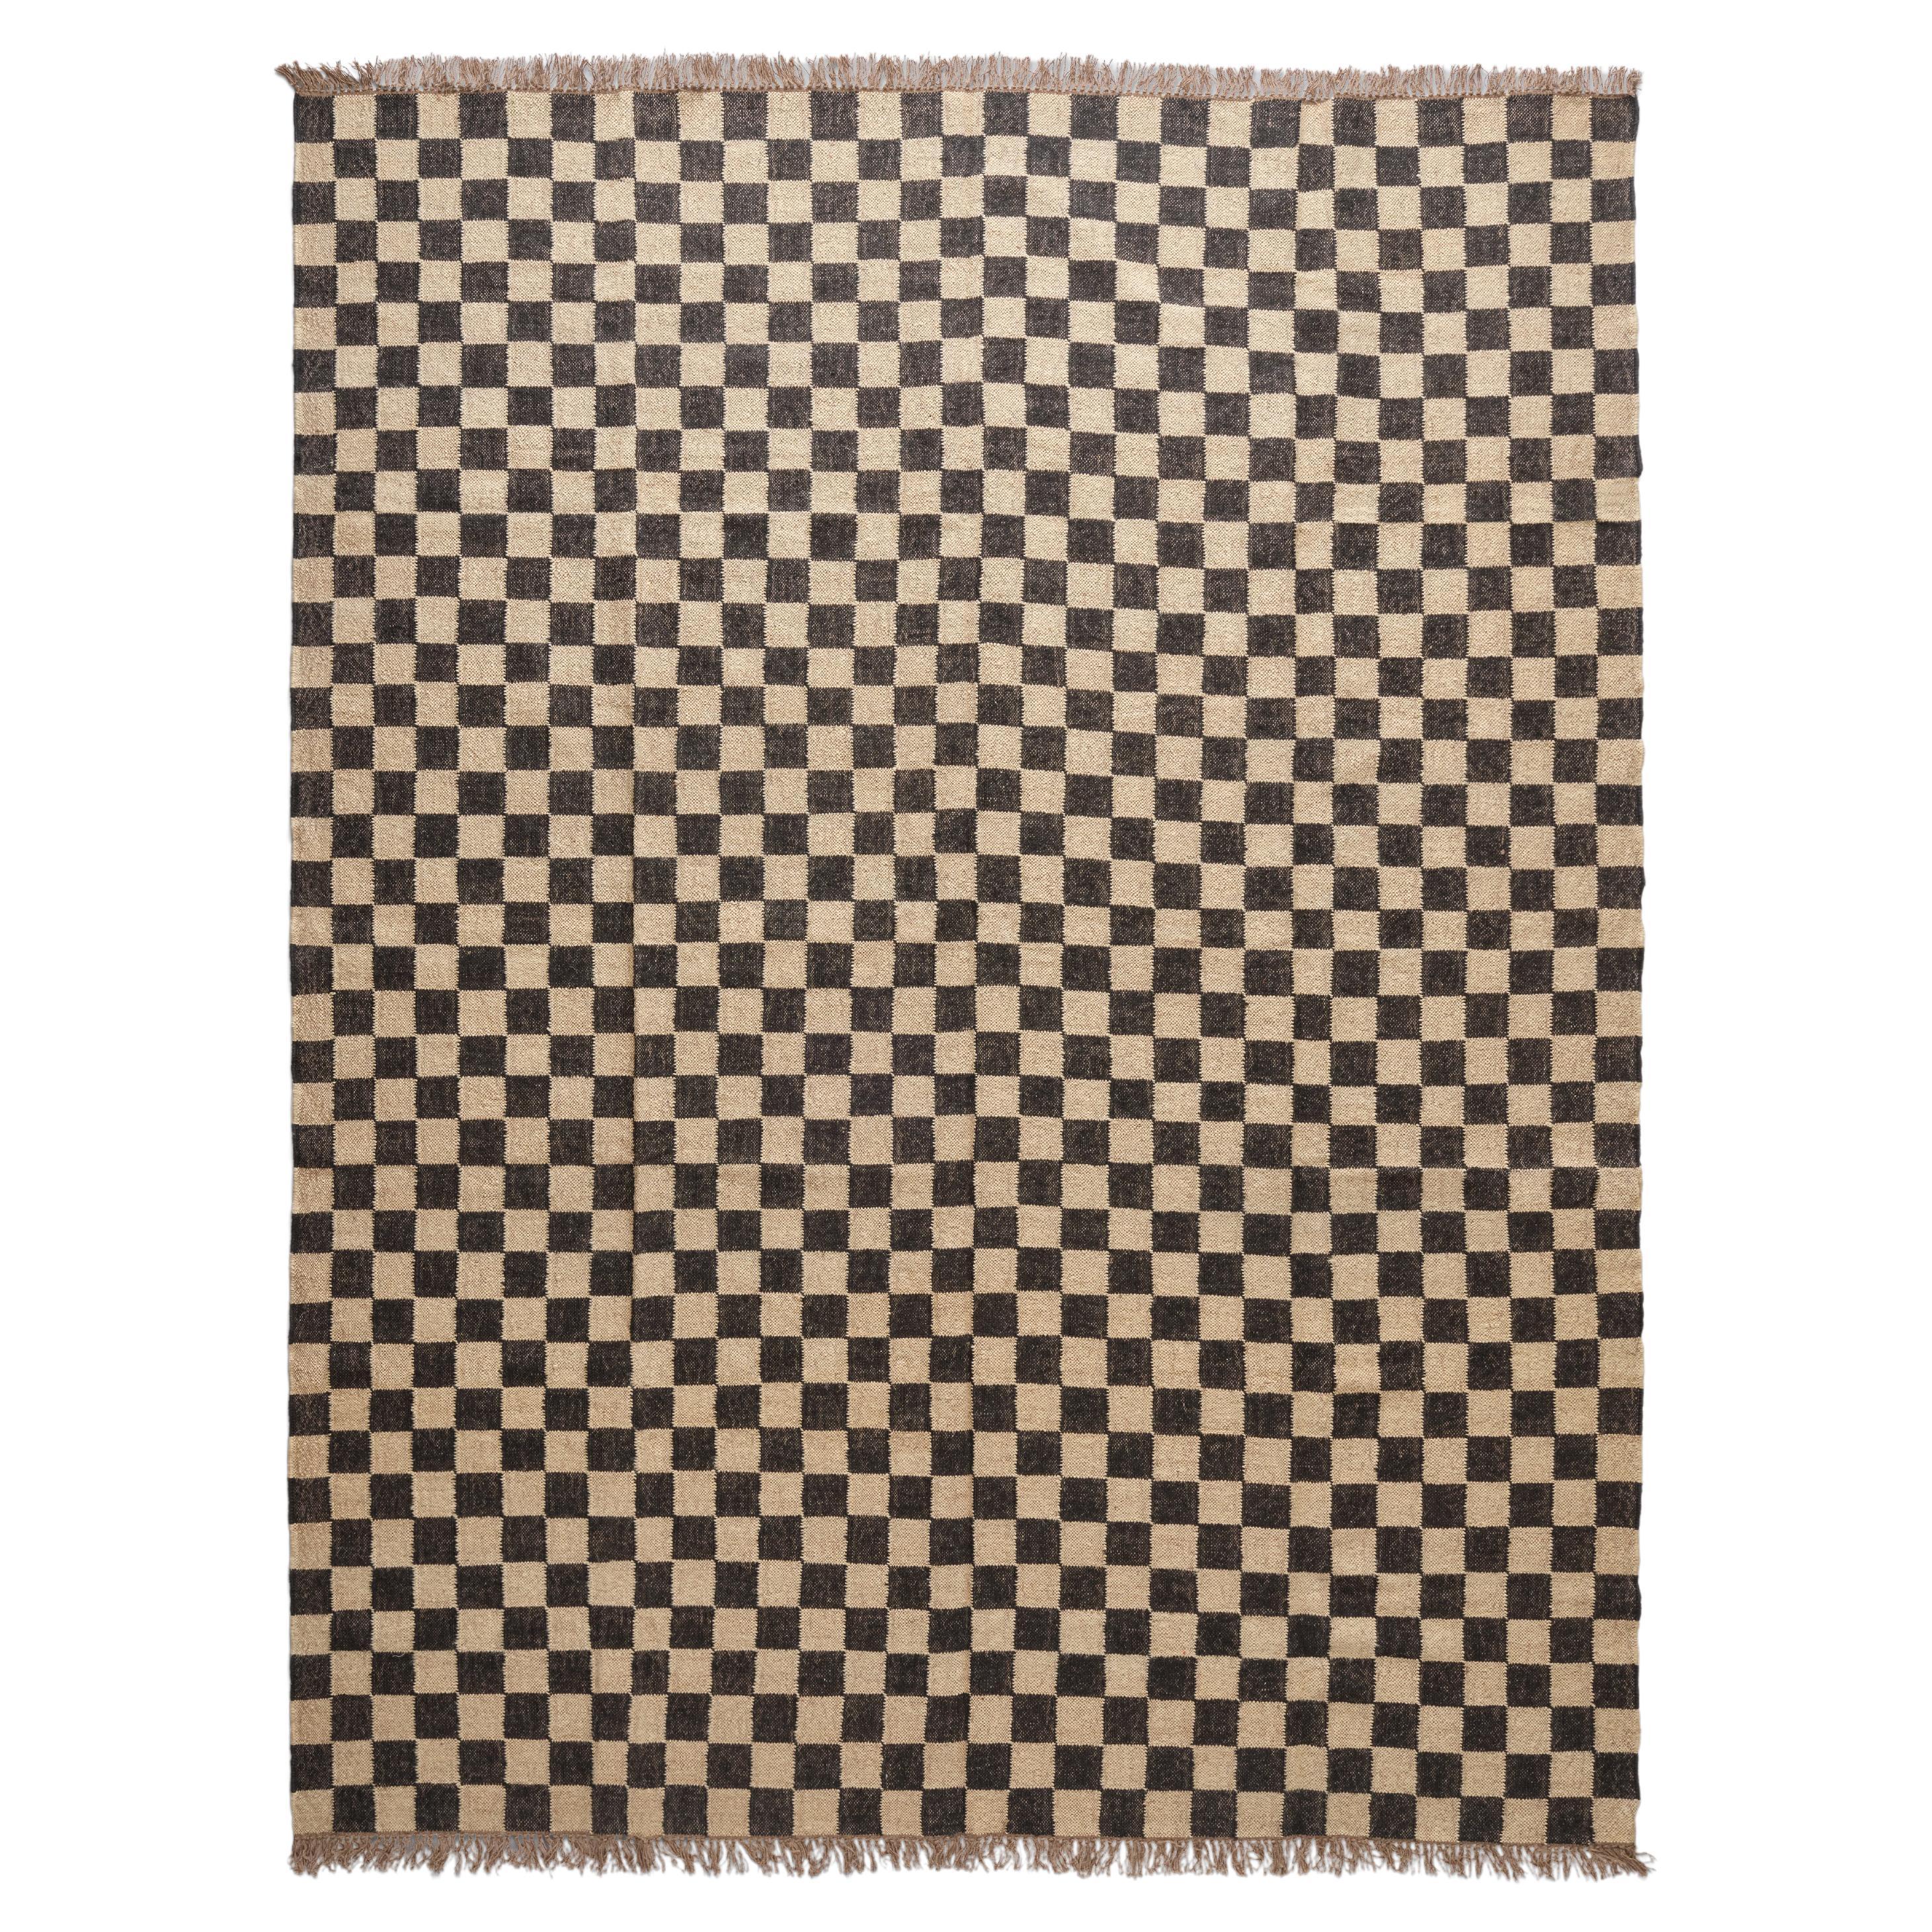 The Forsyth Checkerboard Rug - Off Black, 6x9 For Sale